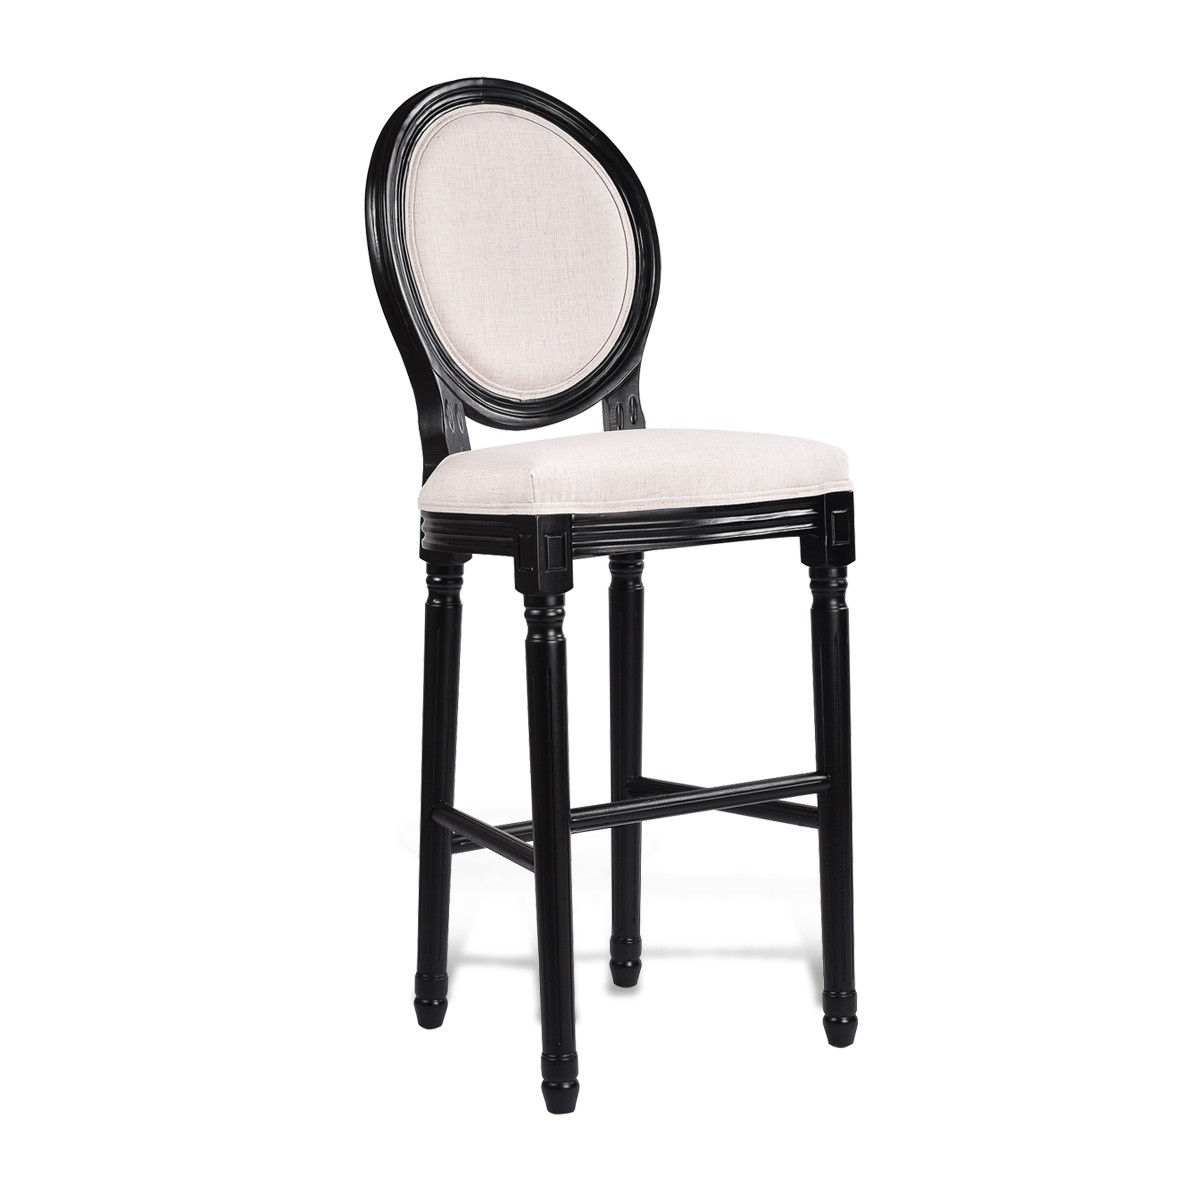 French Provincial Stools Melbourne